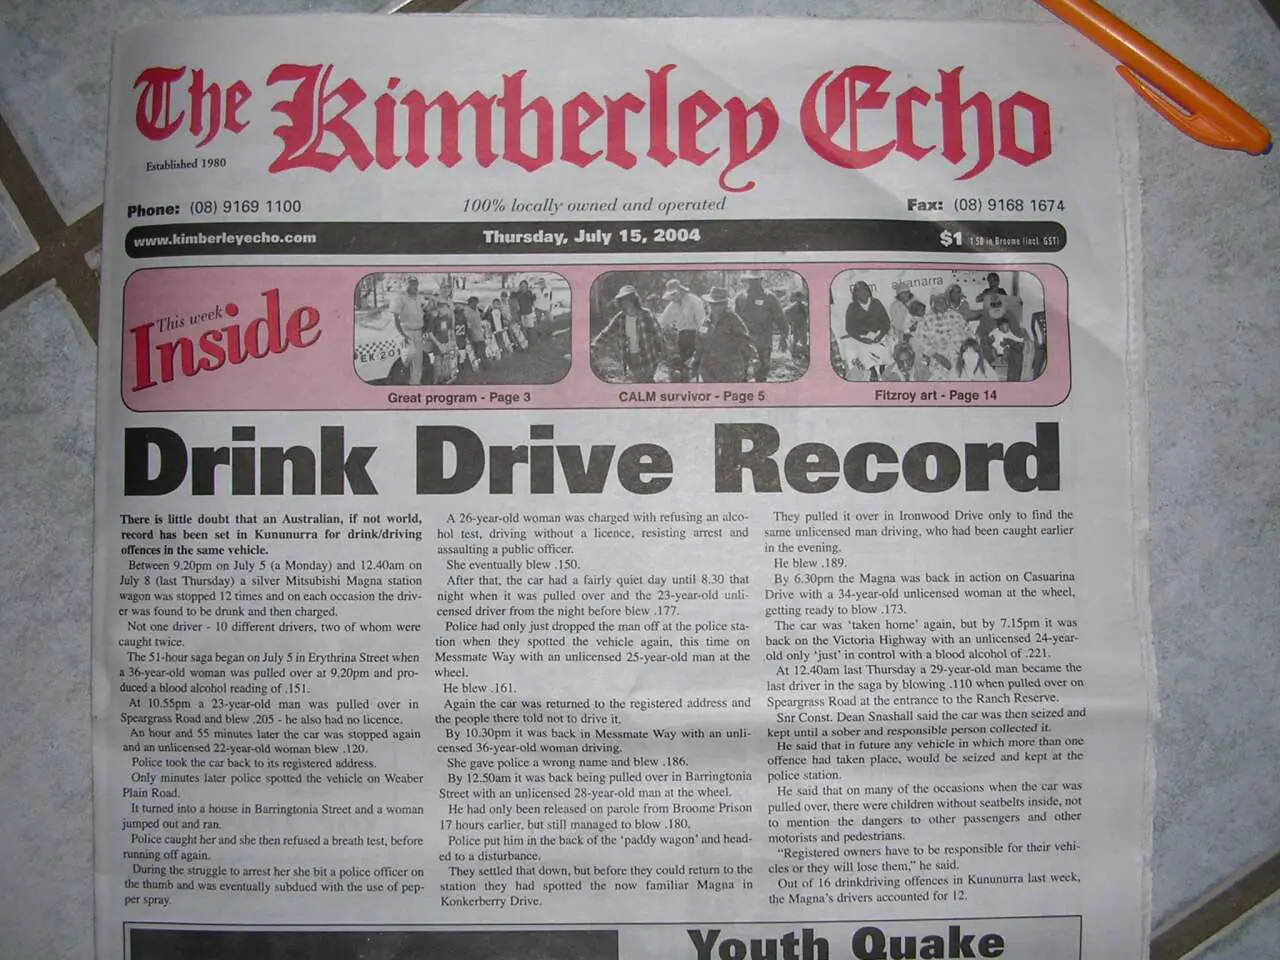 Dui Drink Driving Record | Boozing | Driving Under The Influence (Dui) -The Drink Driving Record! | Boozing | Author: Anthony Bianco - The Travel Tart Blog